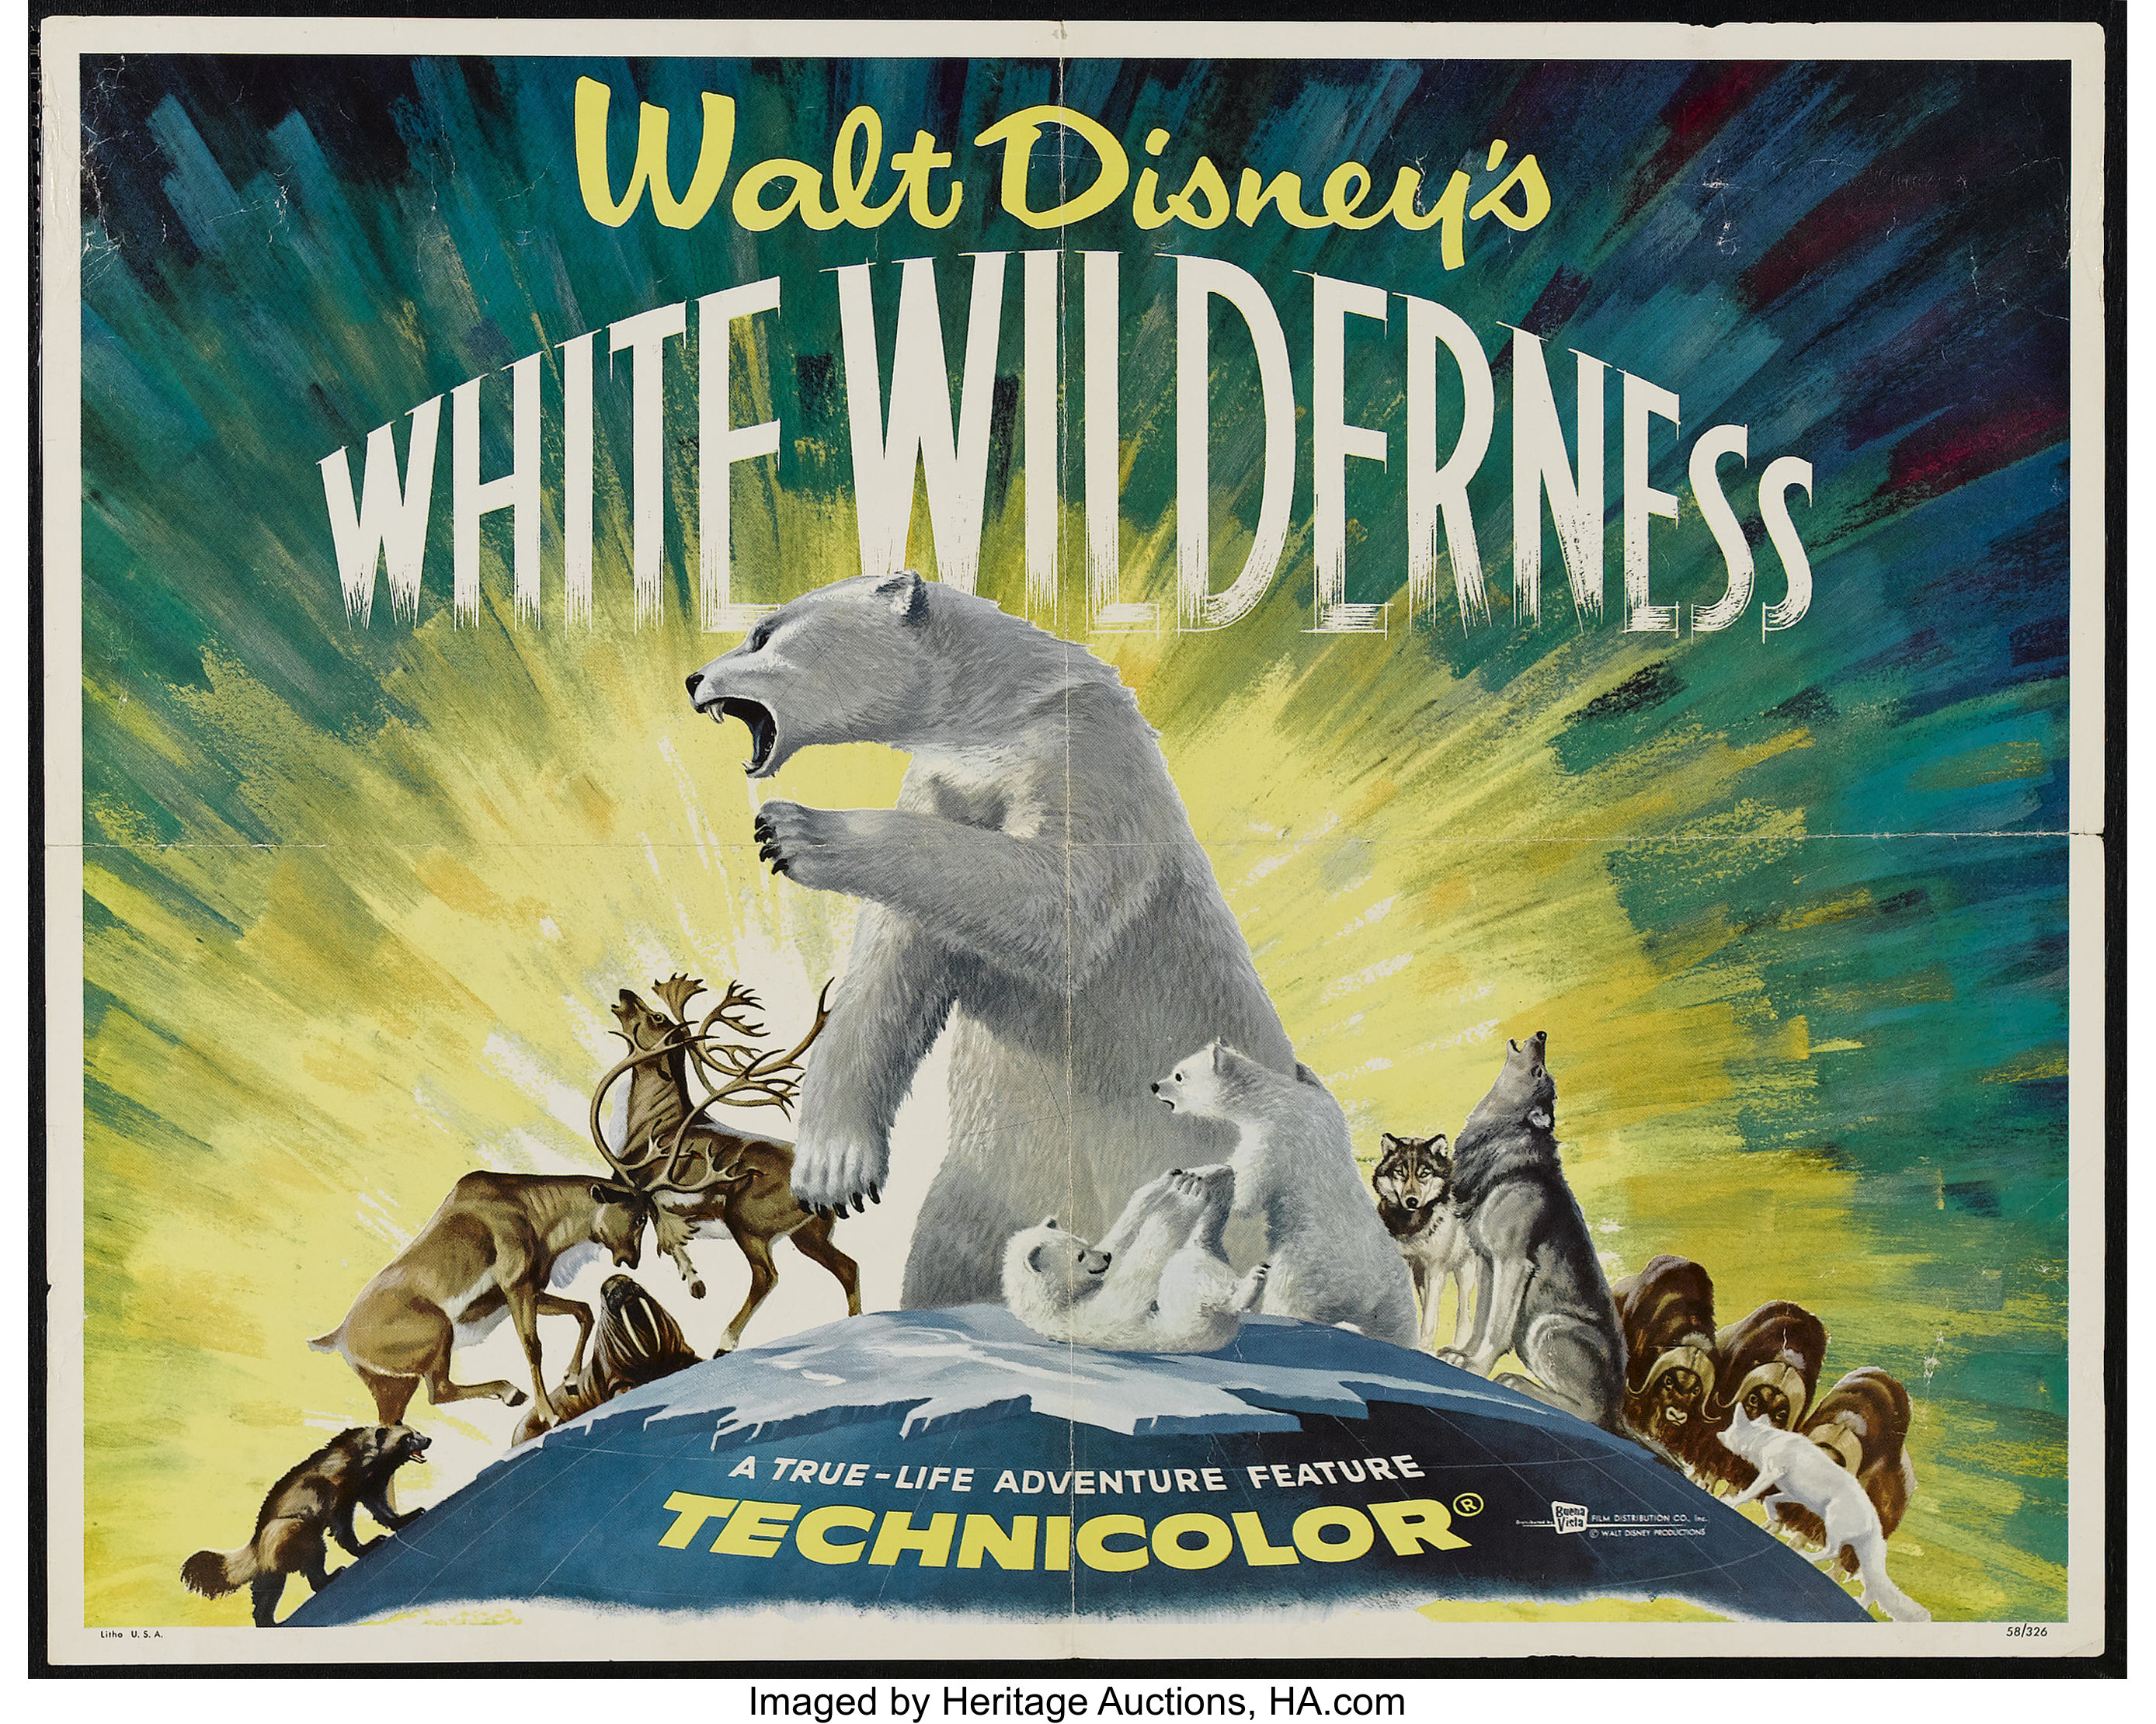 Wild Tales From History - white wilderness disney - Walt Disney's White Wilderness Lire Aventure La Technicolor